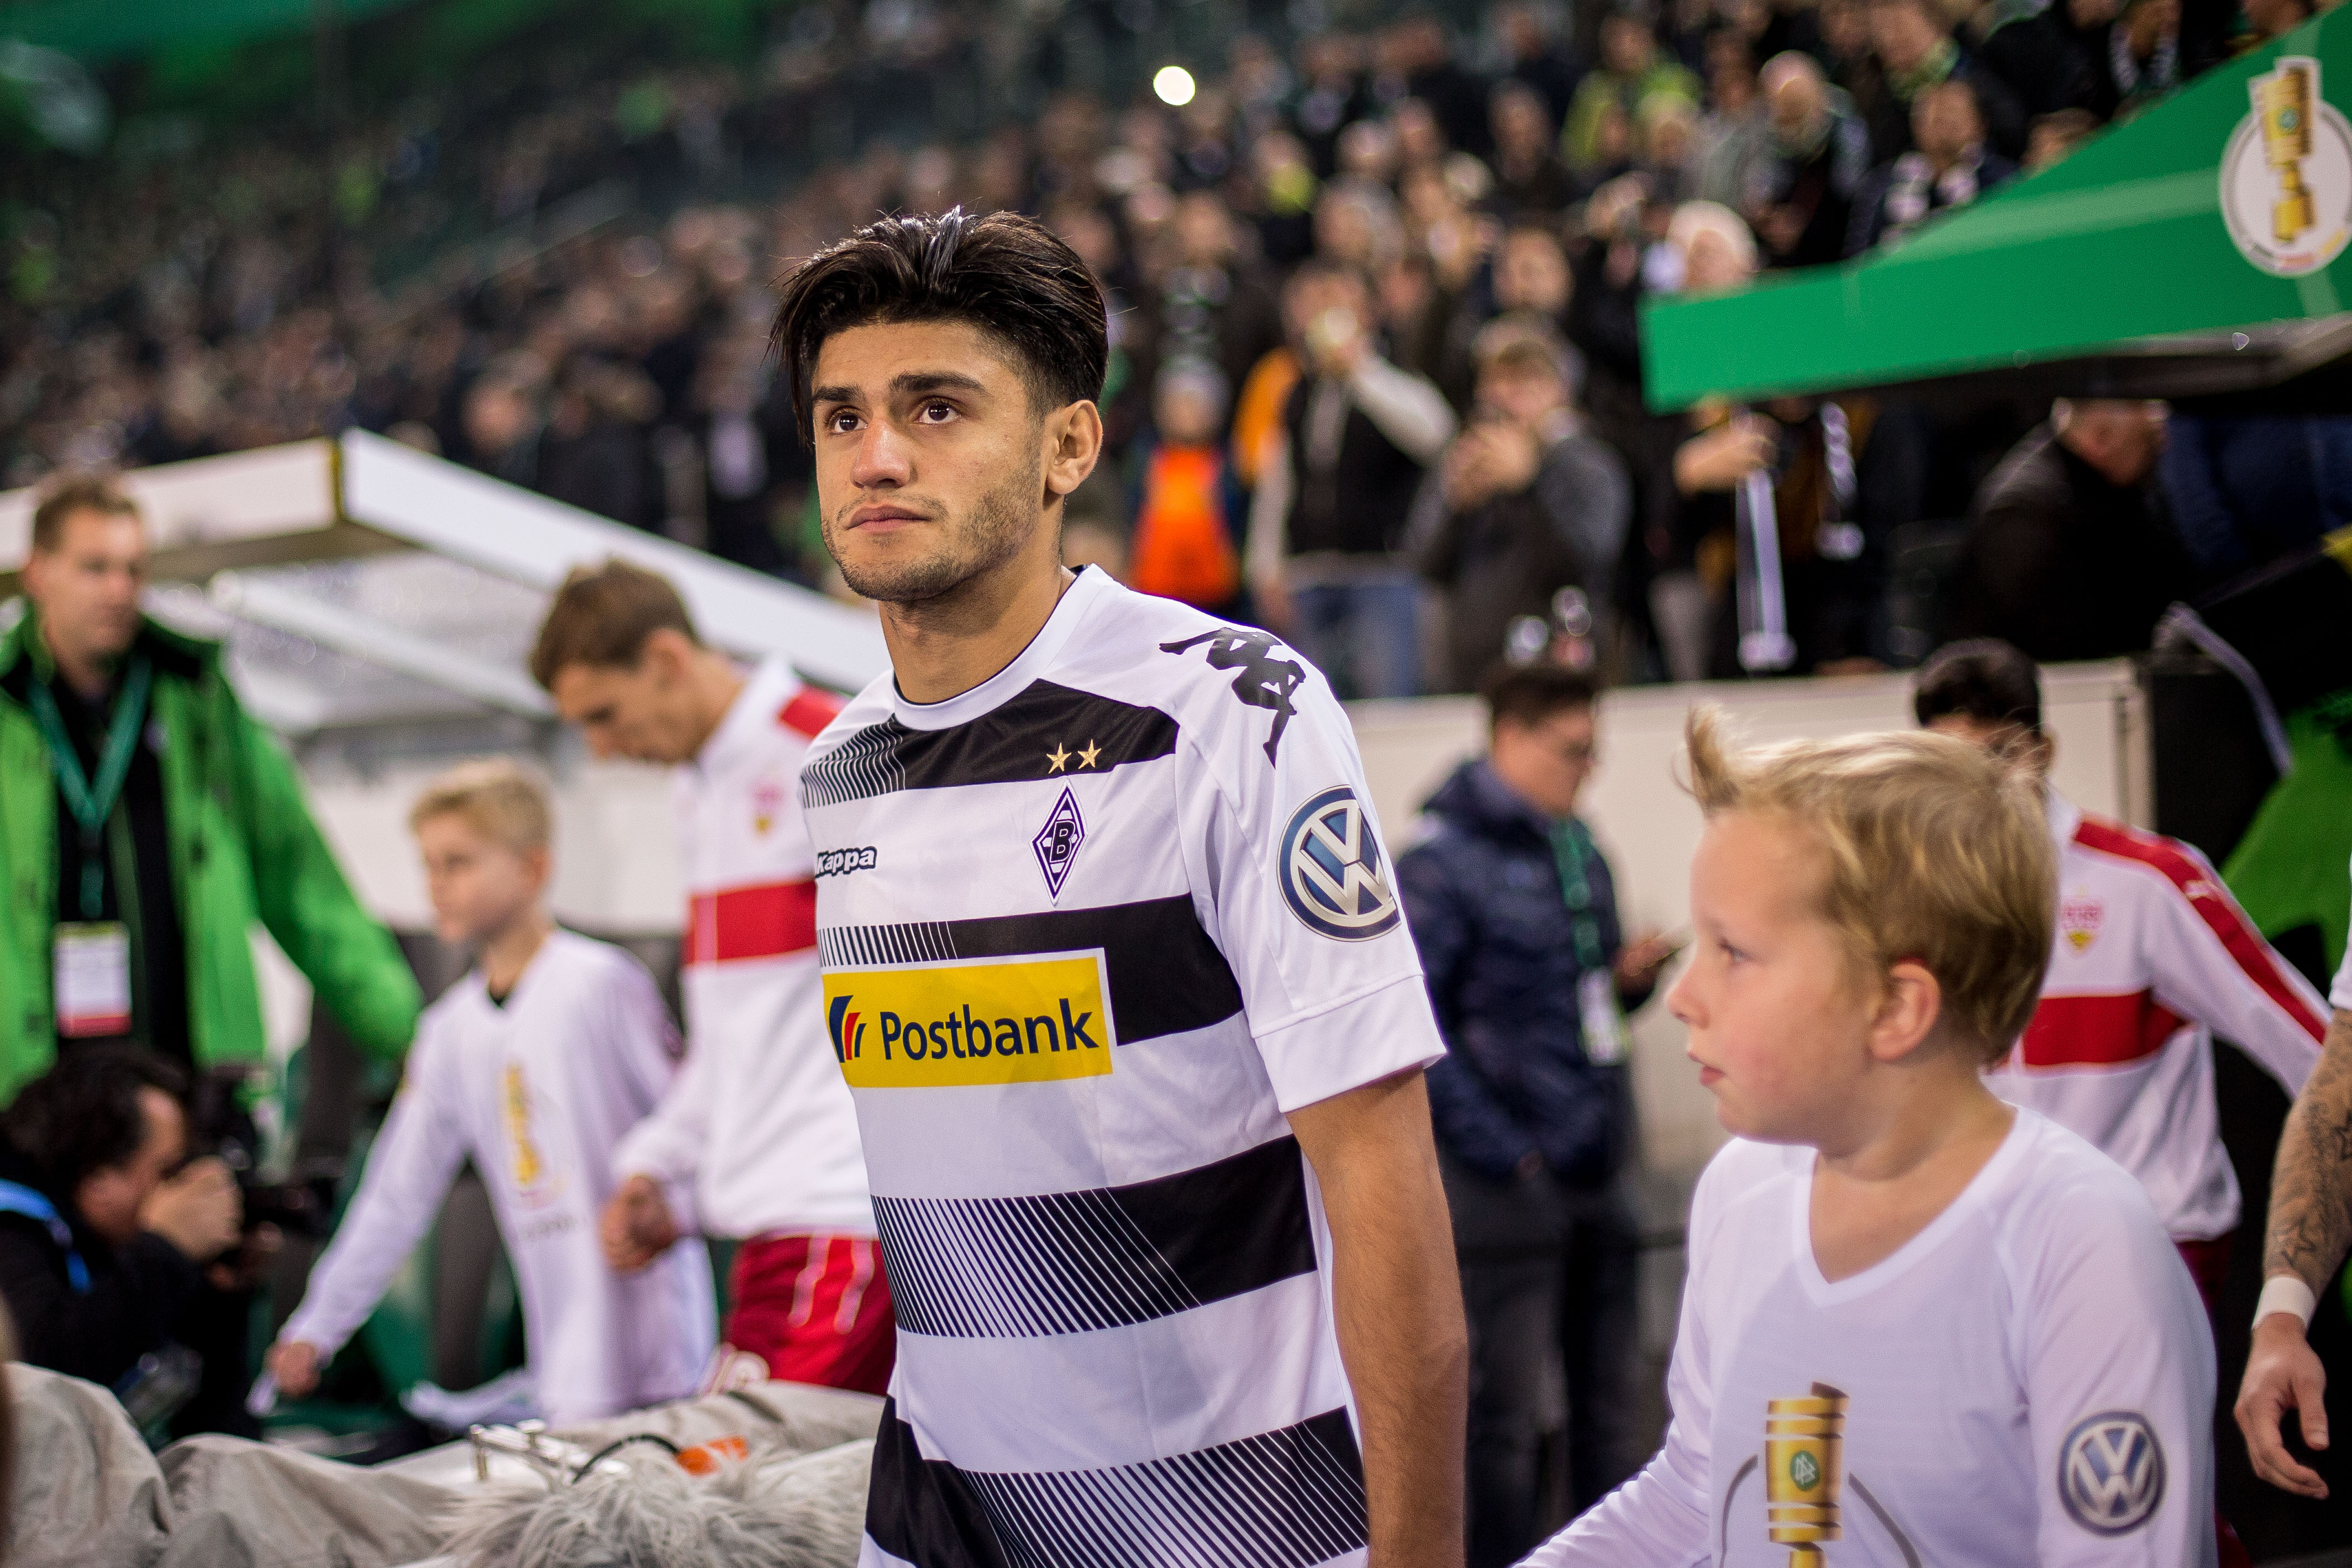 MOENCHENGLADBACH, GERMANY - OCTOBER 25: Mahmoud Dahoud of Moenchengladbach arrives prior the DFB Cup match between Borussia Moenchengladbach and VfB Stuttgart at Borussia-Park on October 25, 2016 in Moenchengladbach, Germany.  (Photo by Maja Hitij/Bongarts/Getty Images)